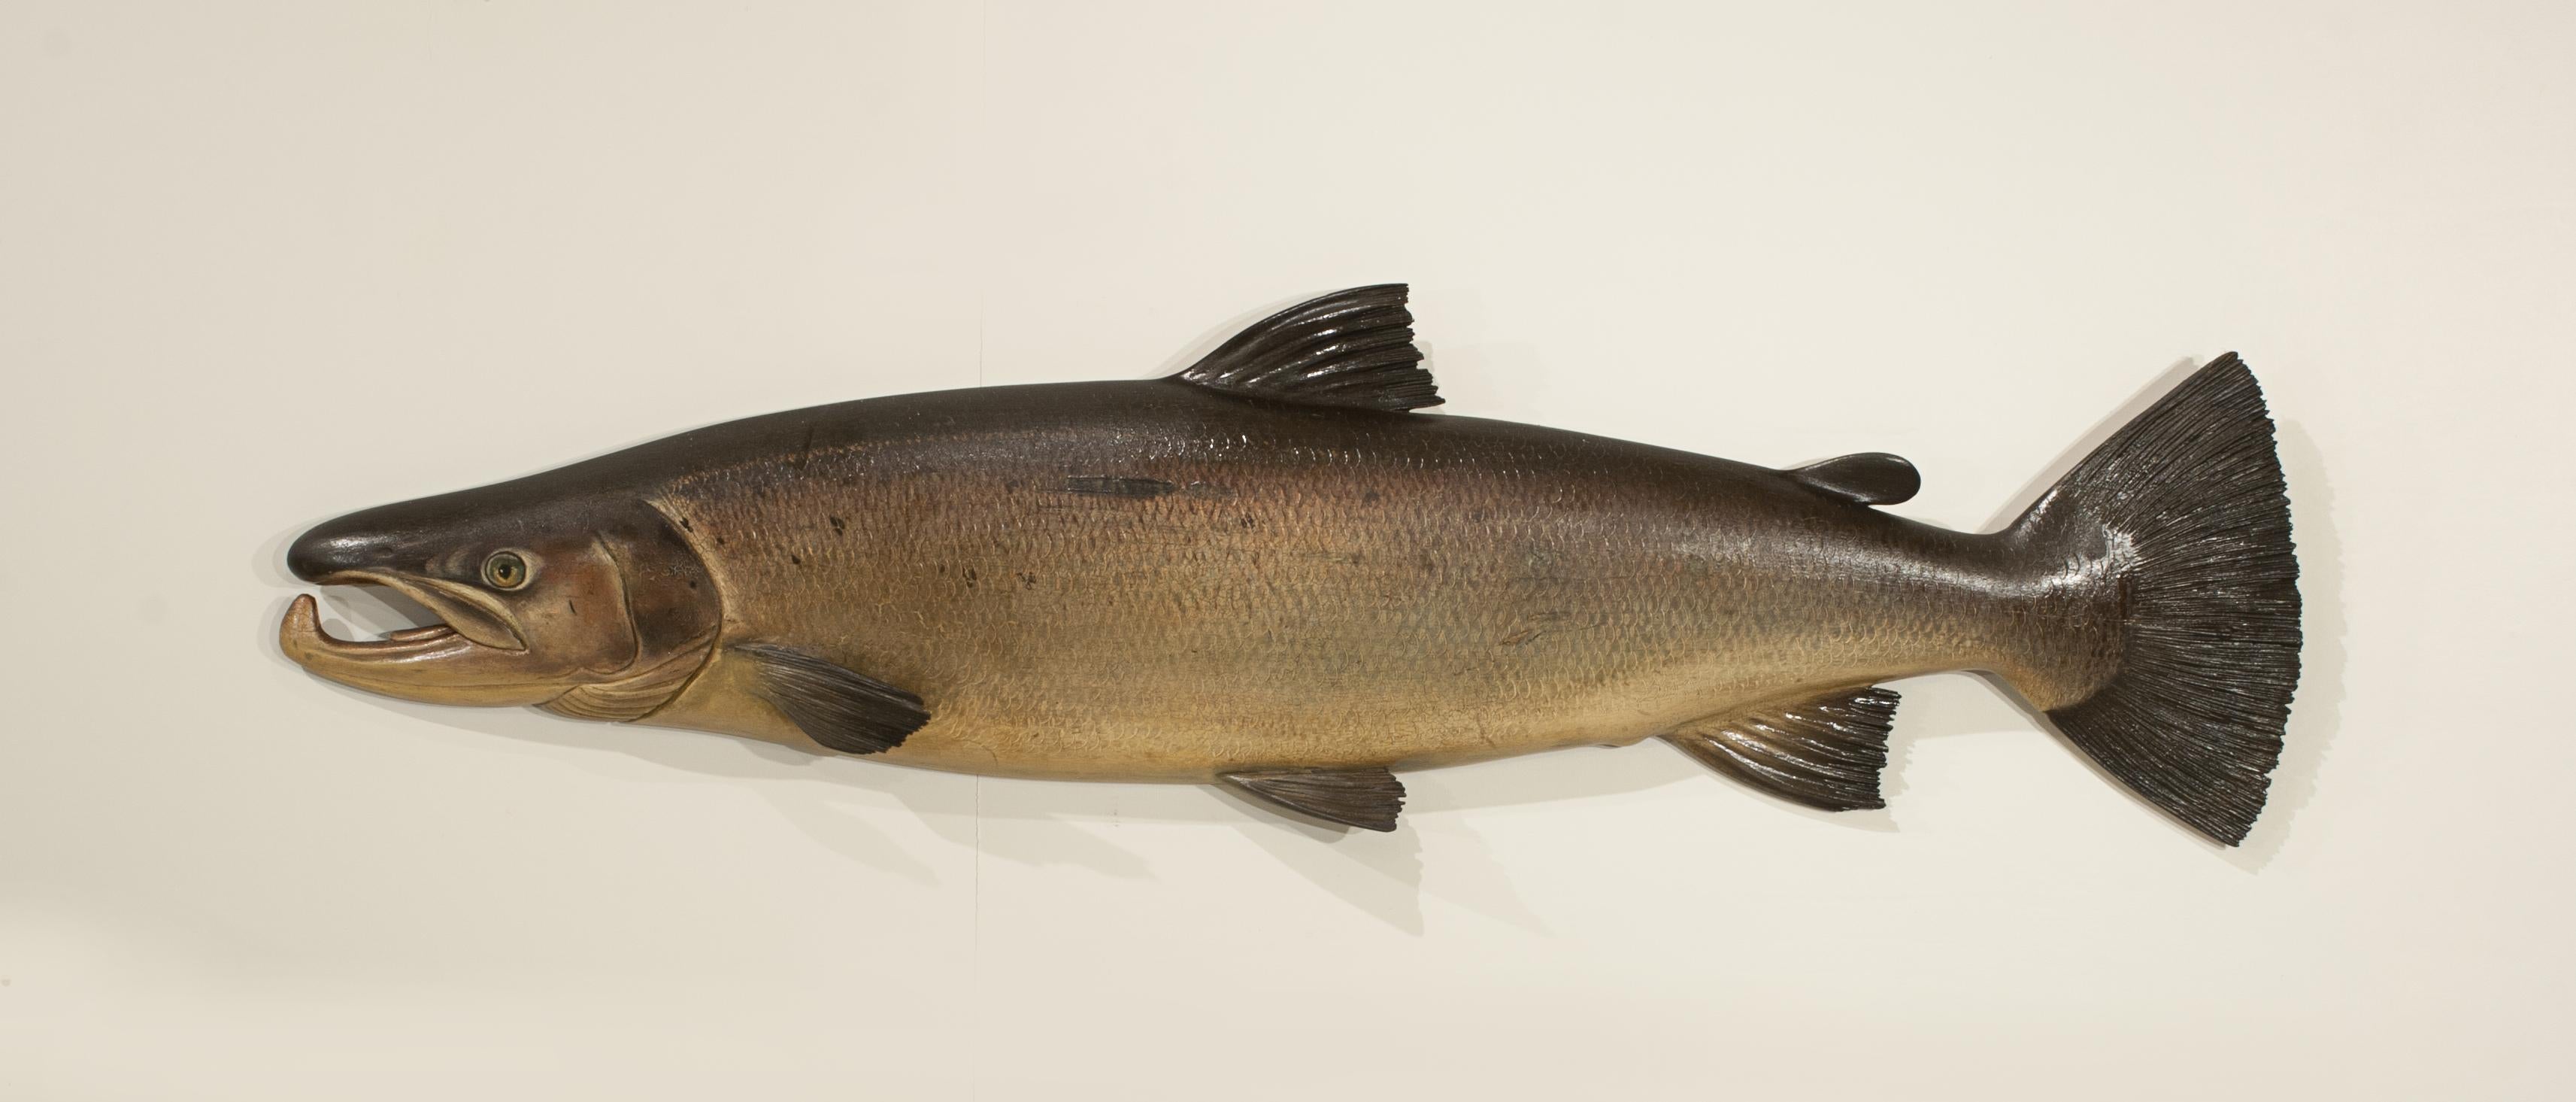 Carved Wye Salmon Trophy Fish.
An excellent Fochaber's studio carved wooden cock salmon. The half block salmon has relief fins and is beautifully executed and painted to a high standard. This is most probably one of the Fochaber fish carved by John